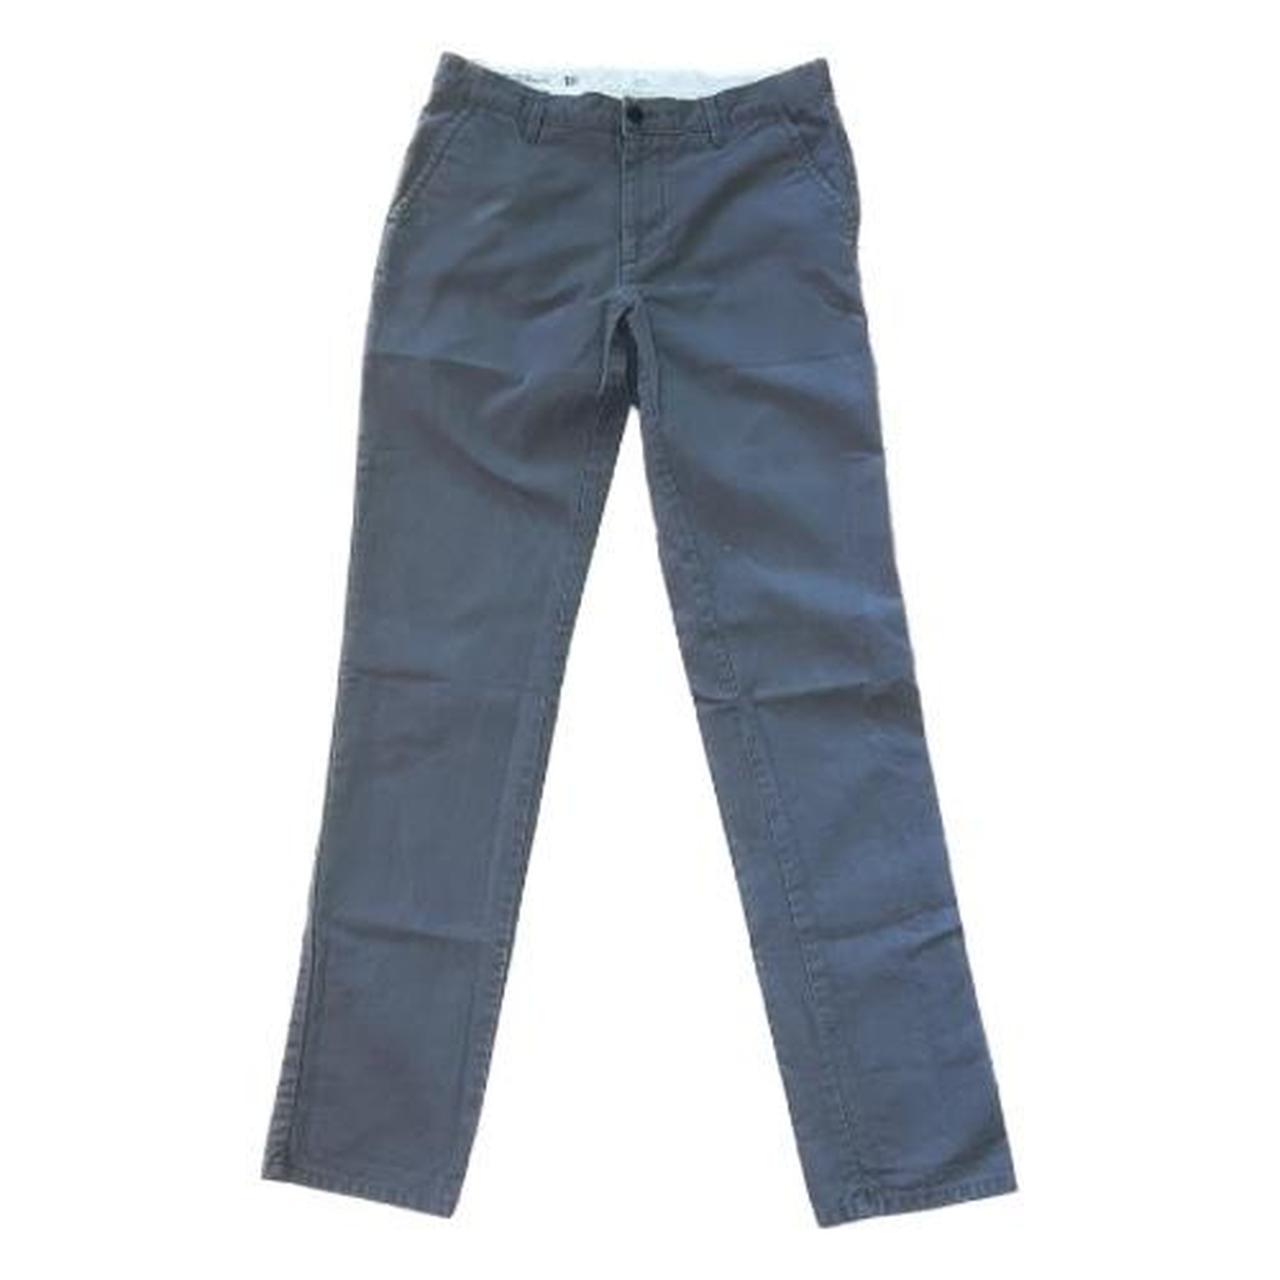 Apolis Men's Grey and Silver Trousers